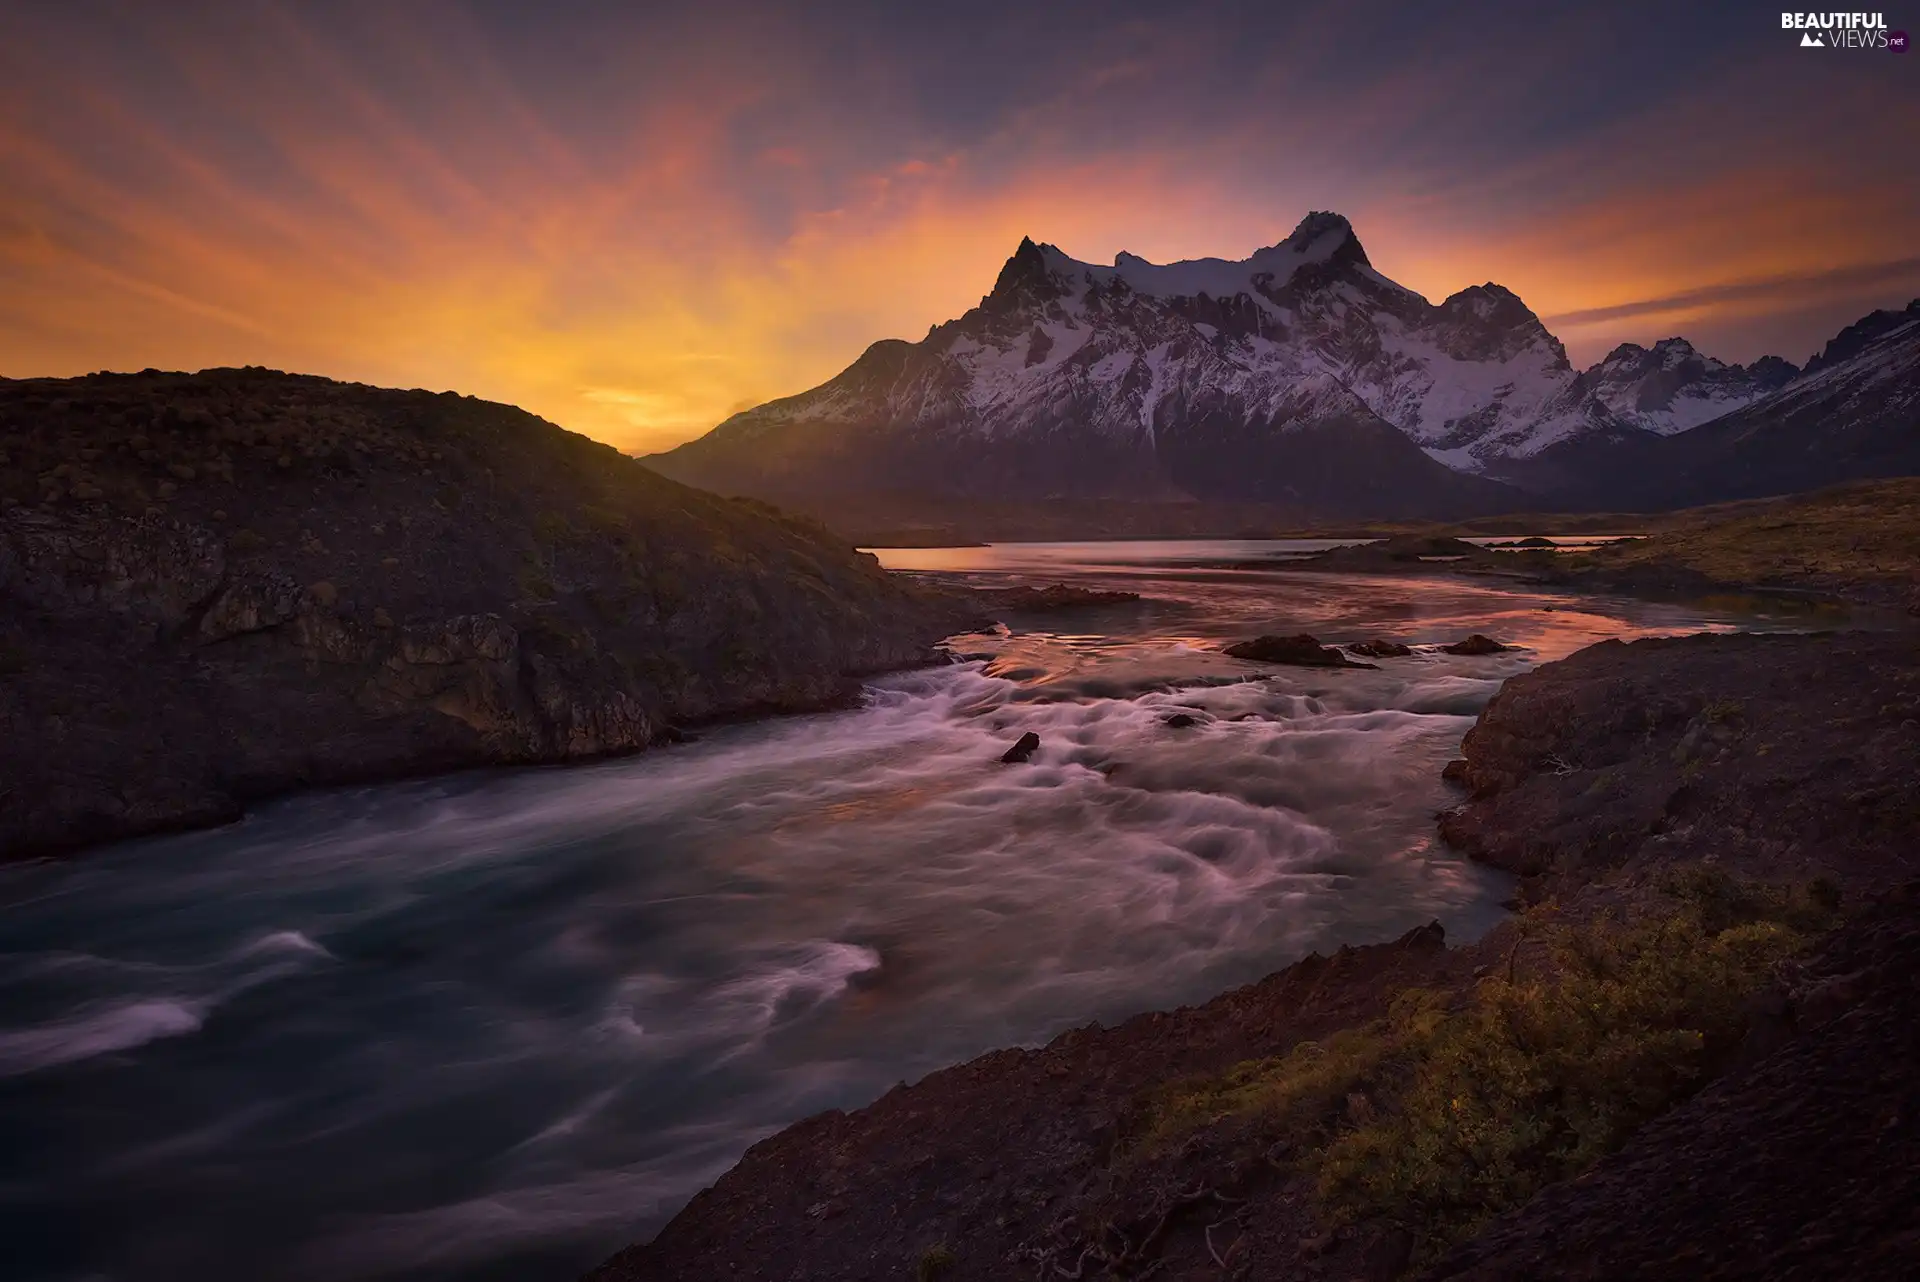 Mountains of Torres del Paine, Snowy, Torres del Paine National Park, peaks, Great Sunsets, Patagonia, Chile, Paine River